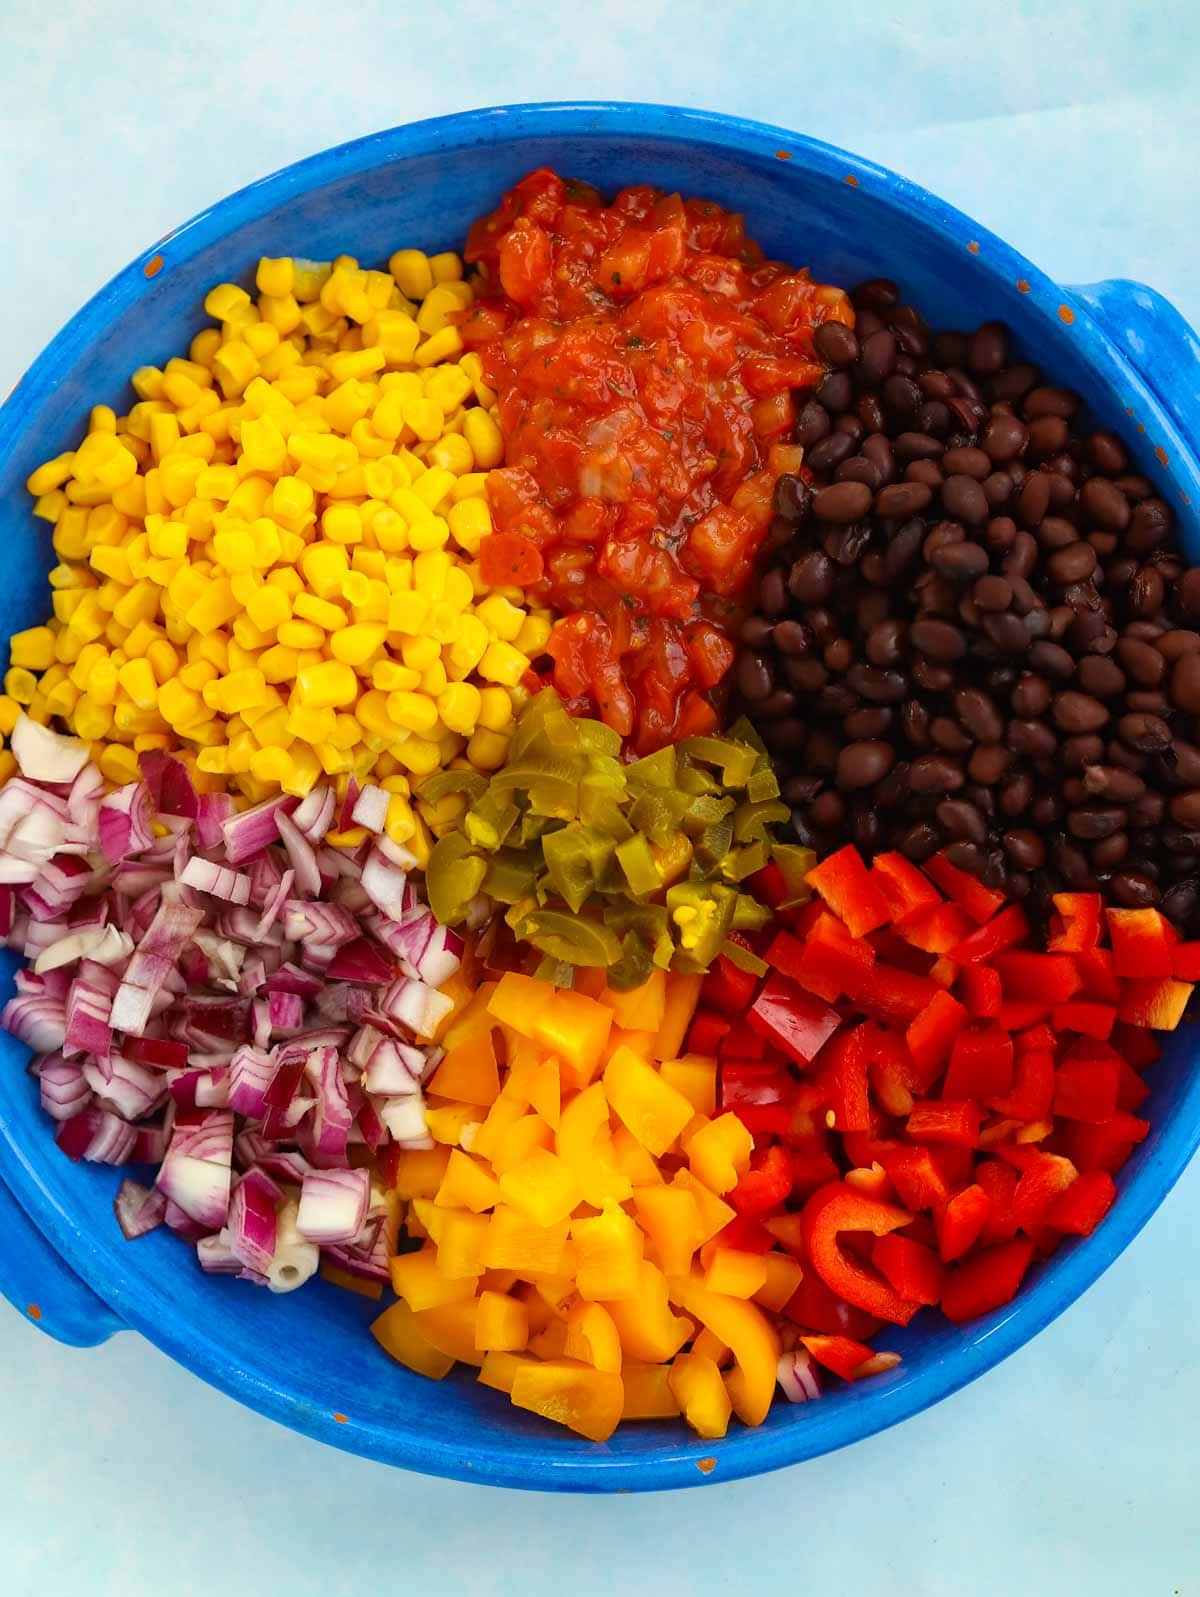 Ingredients of a Mexican Salad - A colourful rainbow effect in a bowl